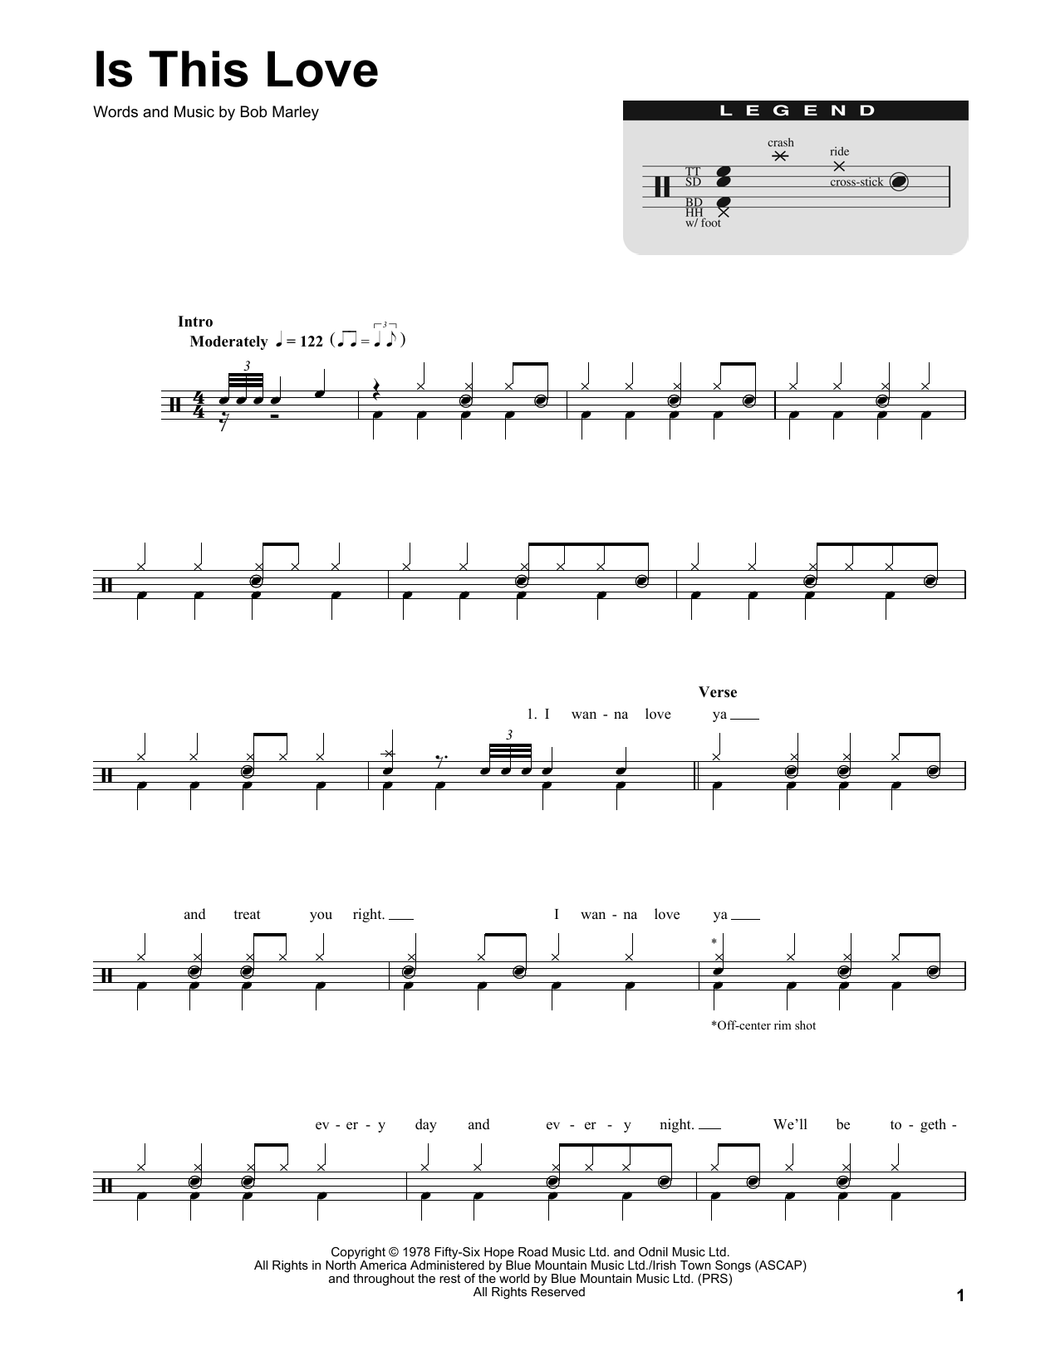 Is This Love - Bob Marley & The Wailers - Full Drum Transcription / Drum Sheet Music - SheetMusicDirect DT